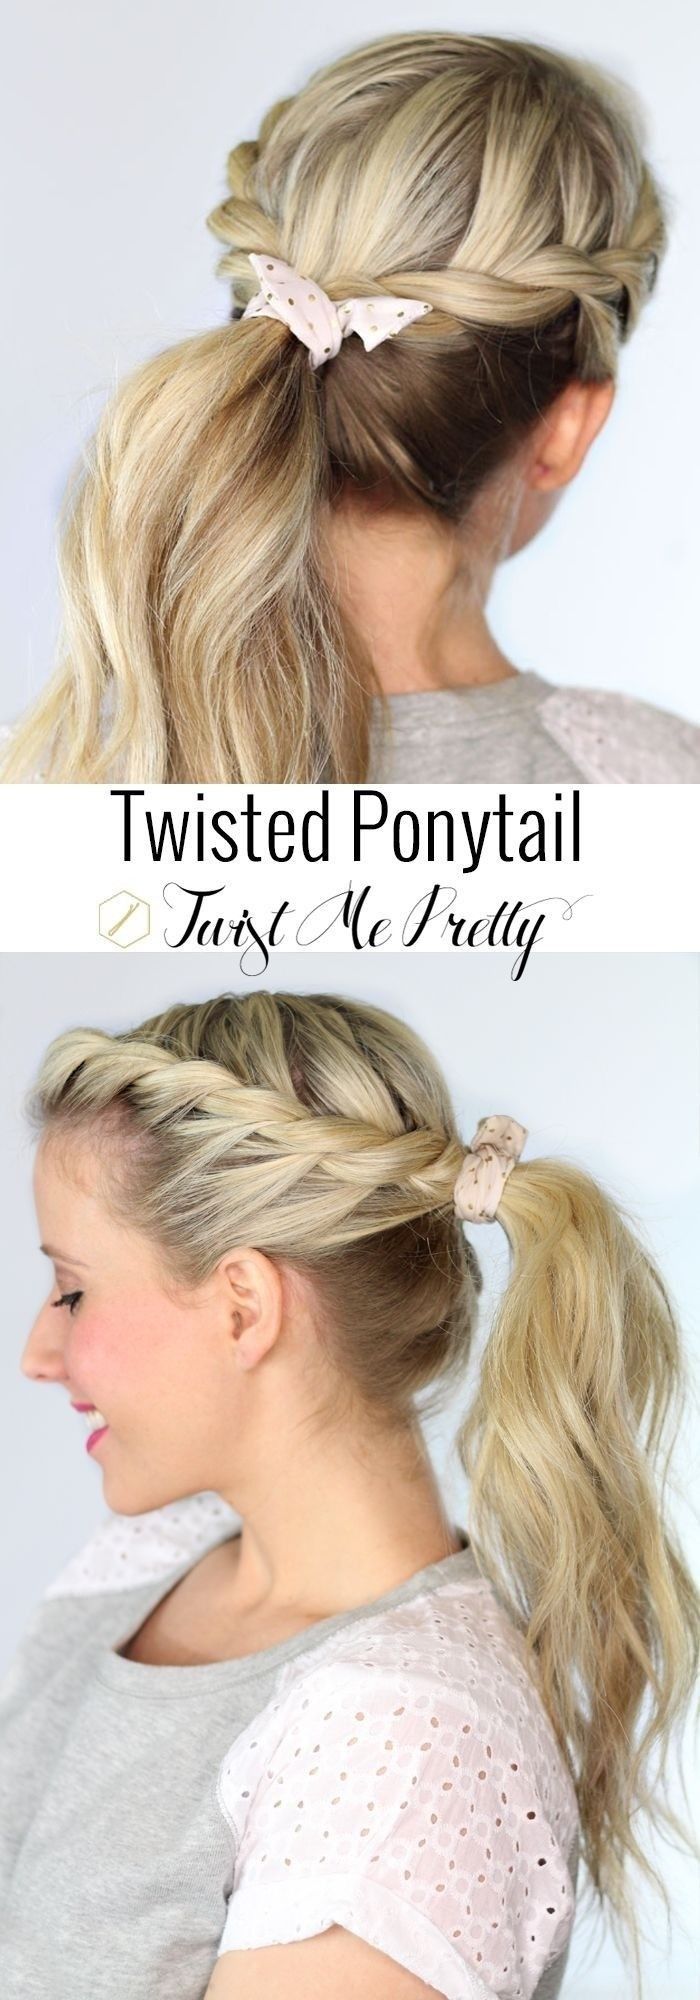 Easy Ponytail Hairstyle
 20 Ponytail Hairstyles Discover Latest Ponytail Ideas Now